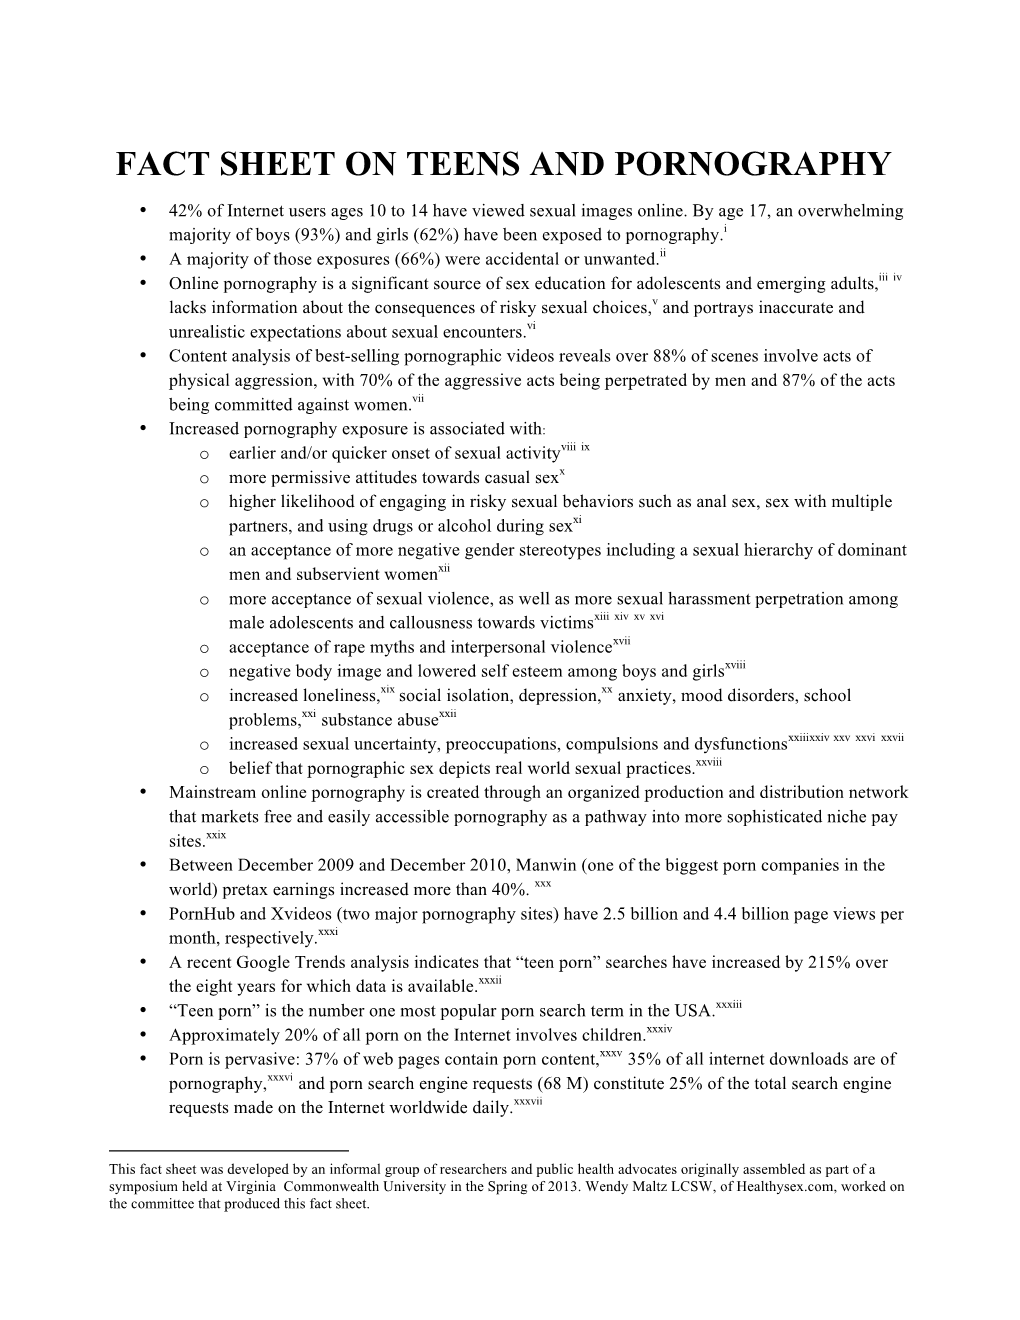 FACTS on Teens & Porn